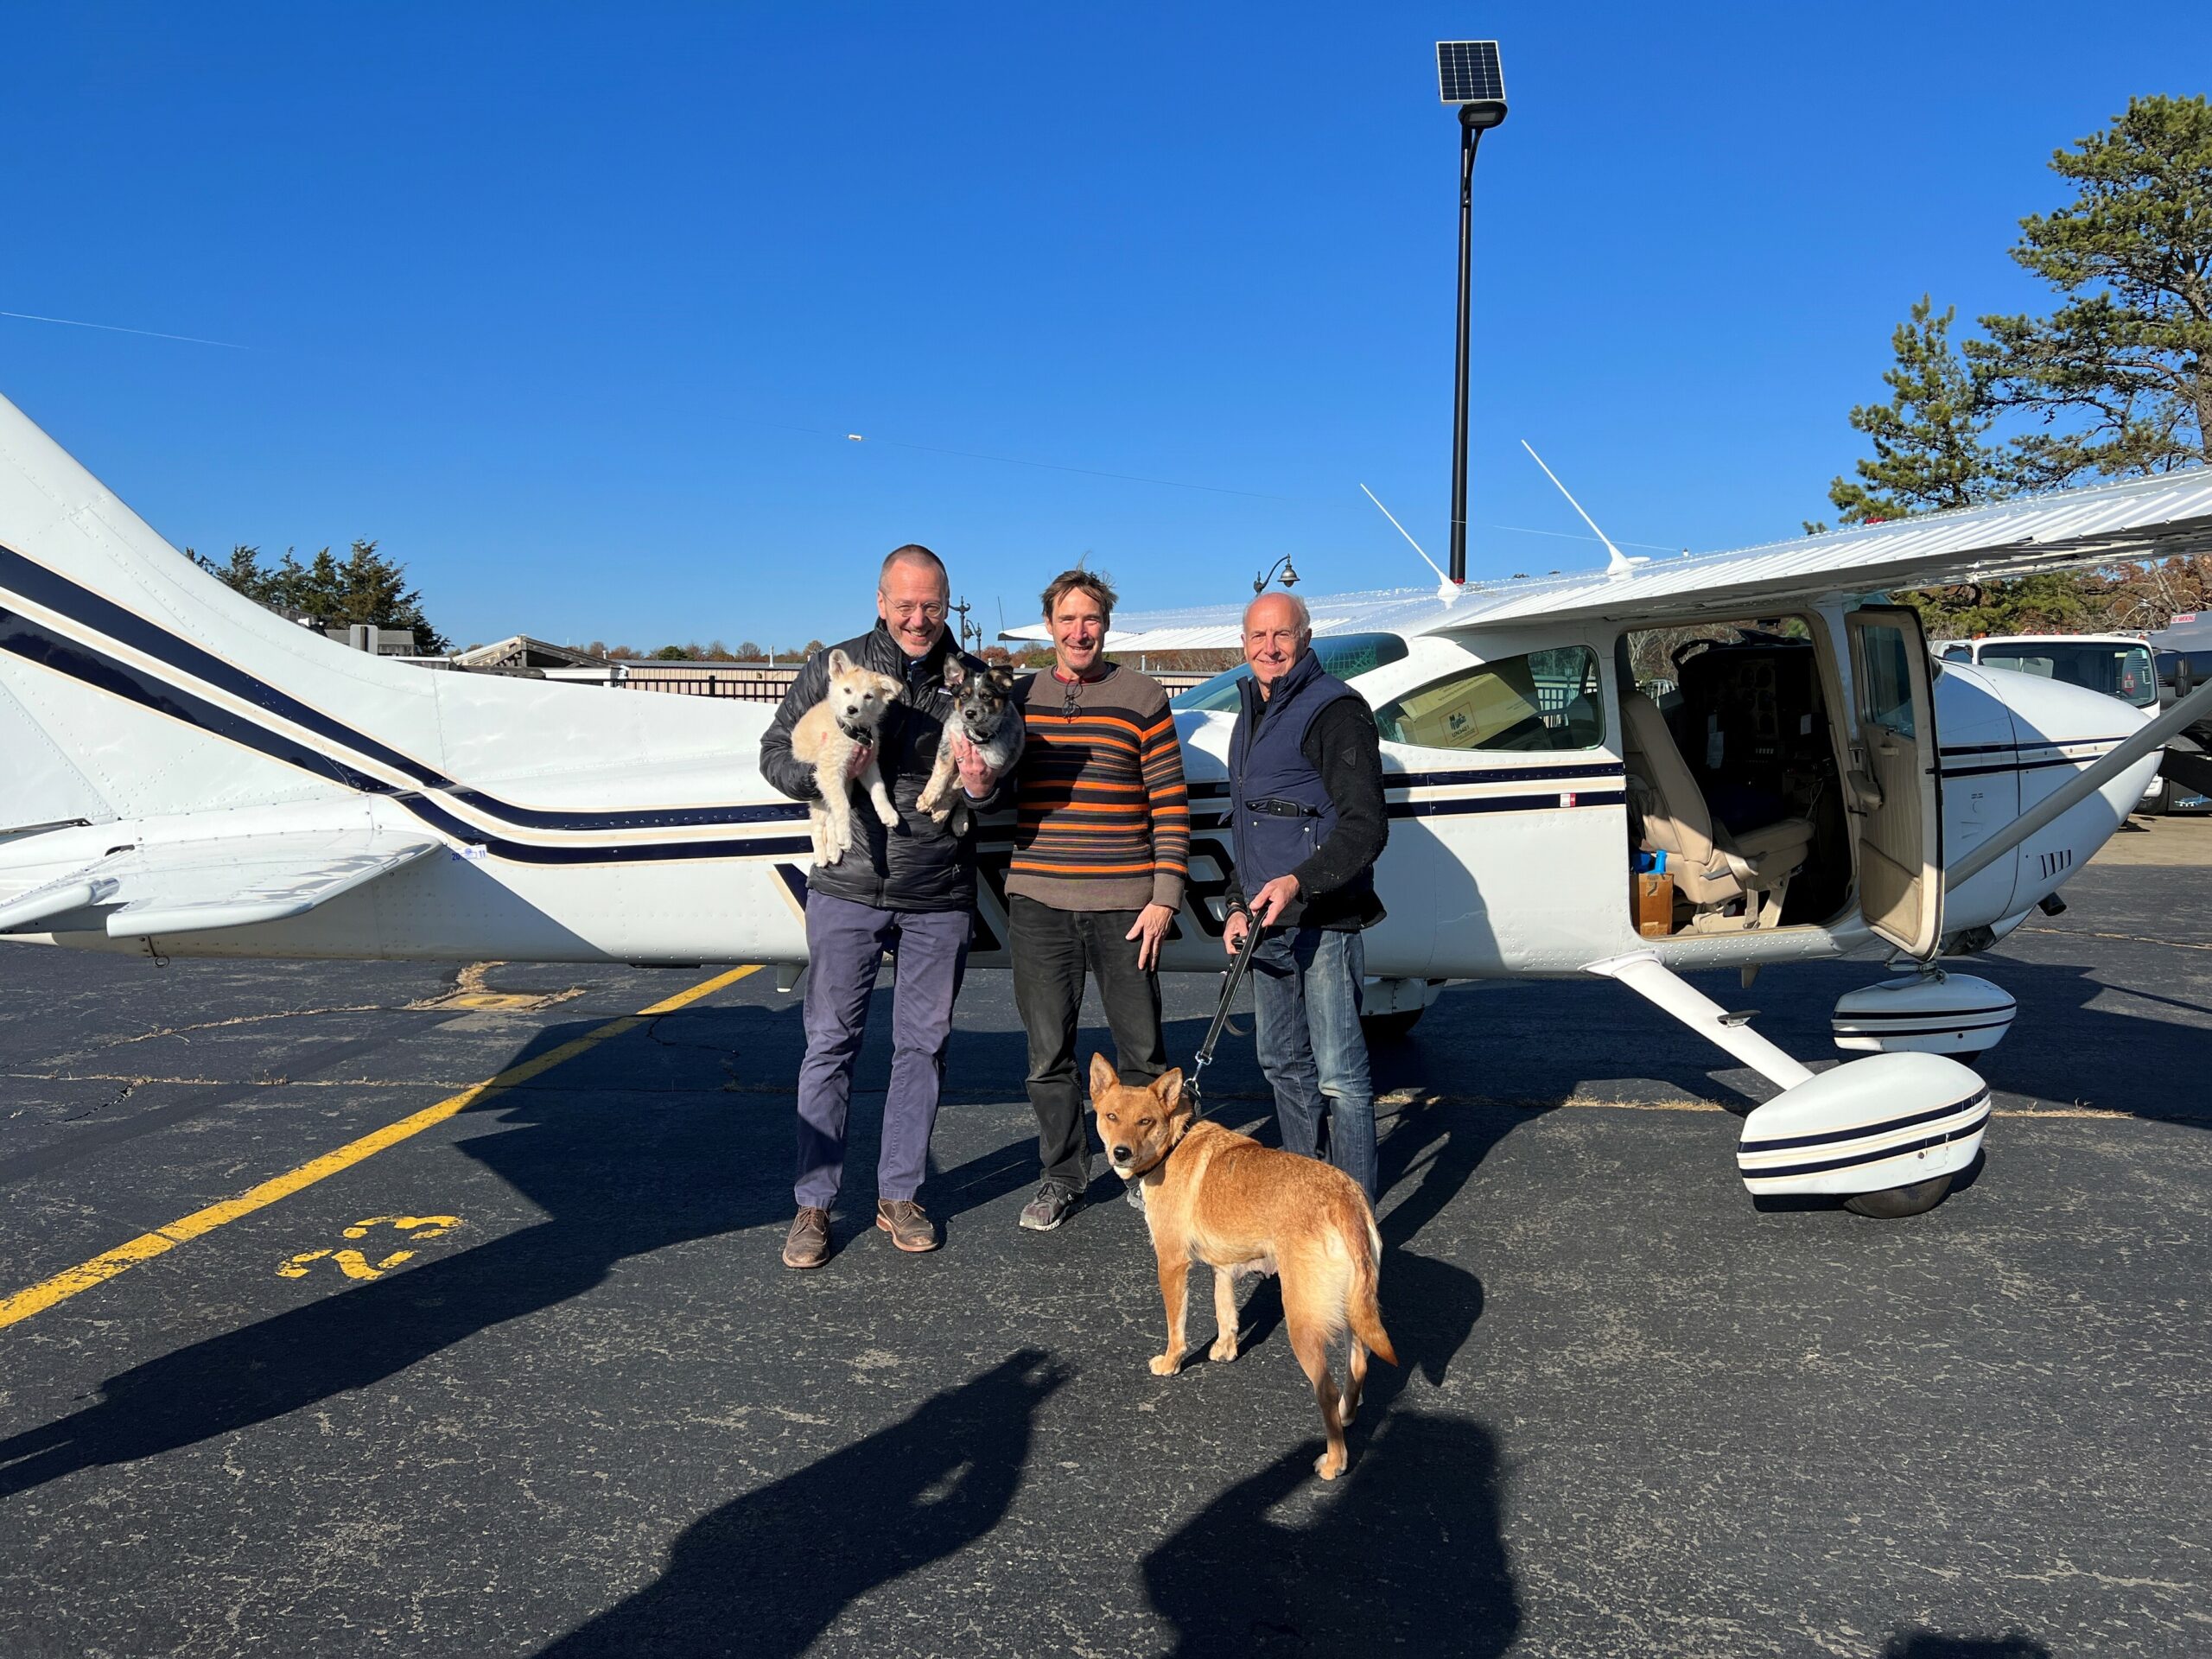 Animal Rescue Fund of the Hamptons Executive Director Scott Howe holds Biscochito and Blue Corn after pilots Dr. George Dempsey, middle, and David Reinbach, with mom Zia on leash, arrived from New Mexico. LAUREN DEMPSEY